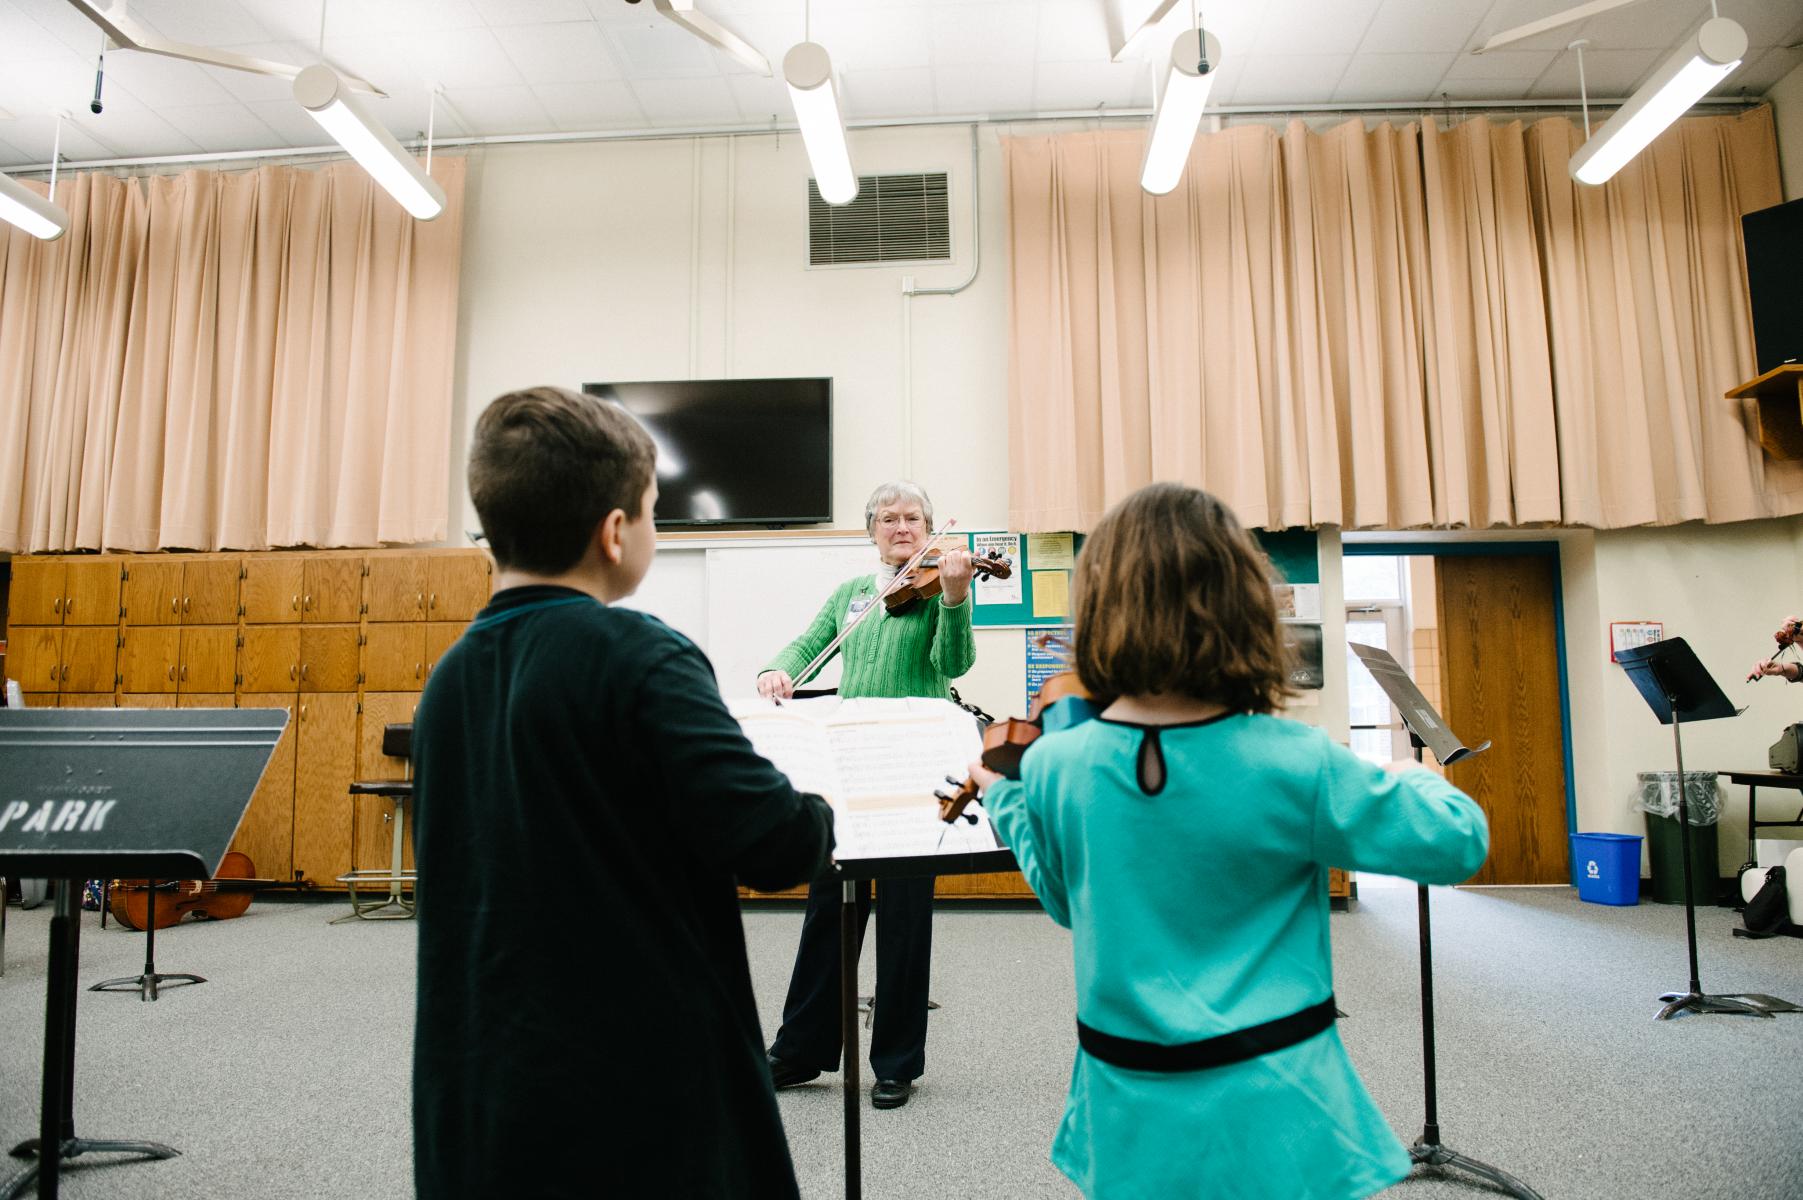 Master Teacher works with String Project students